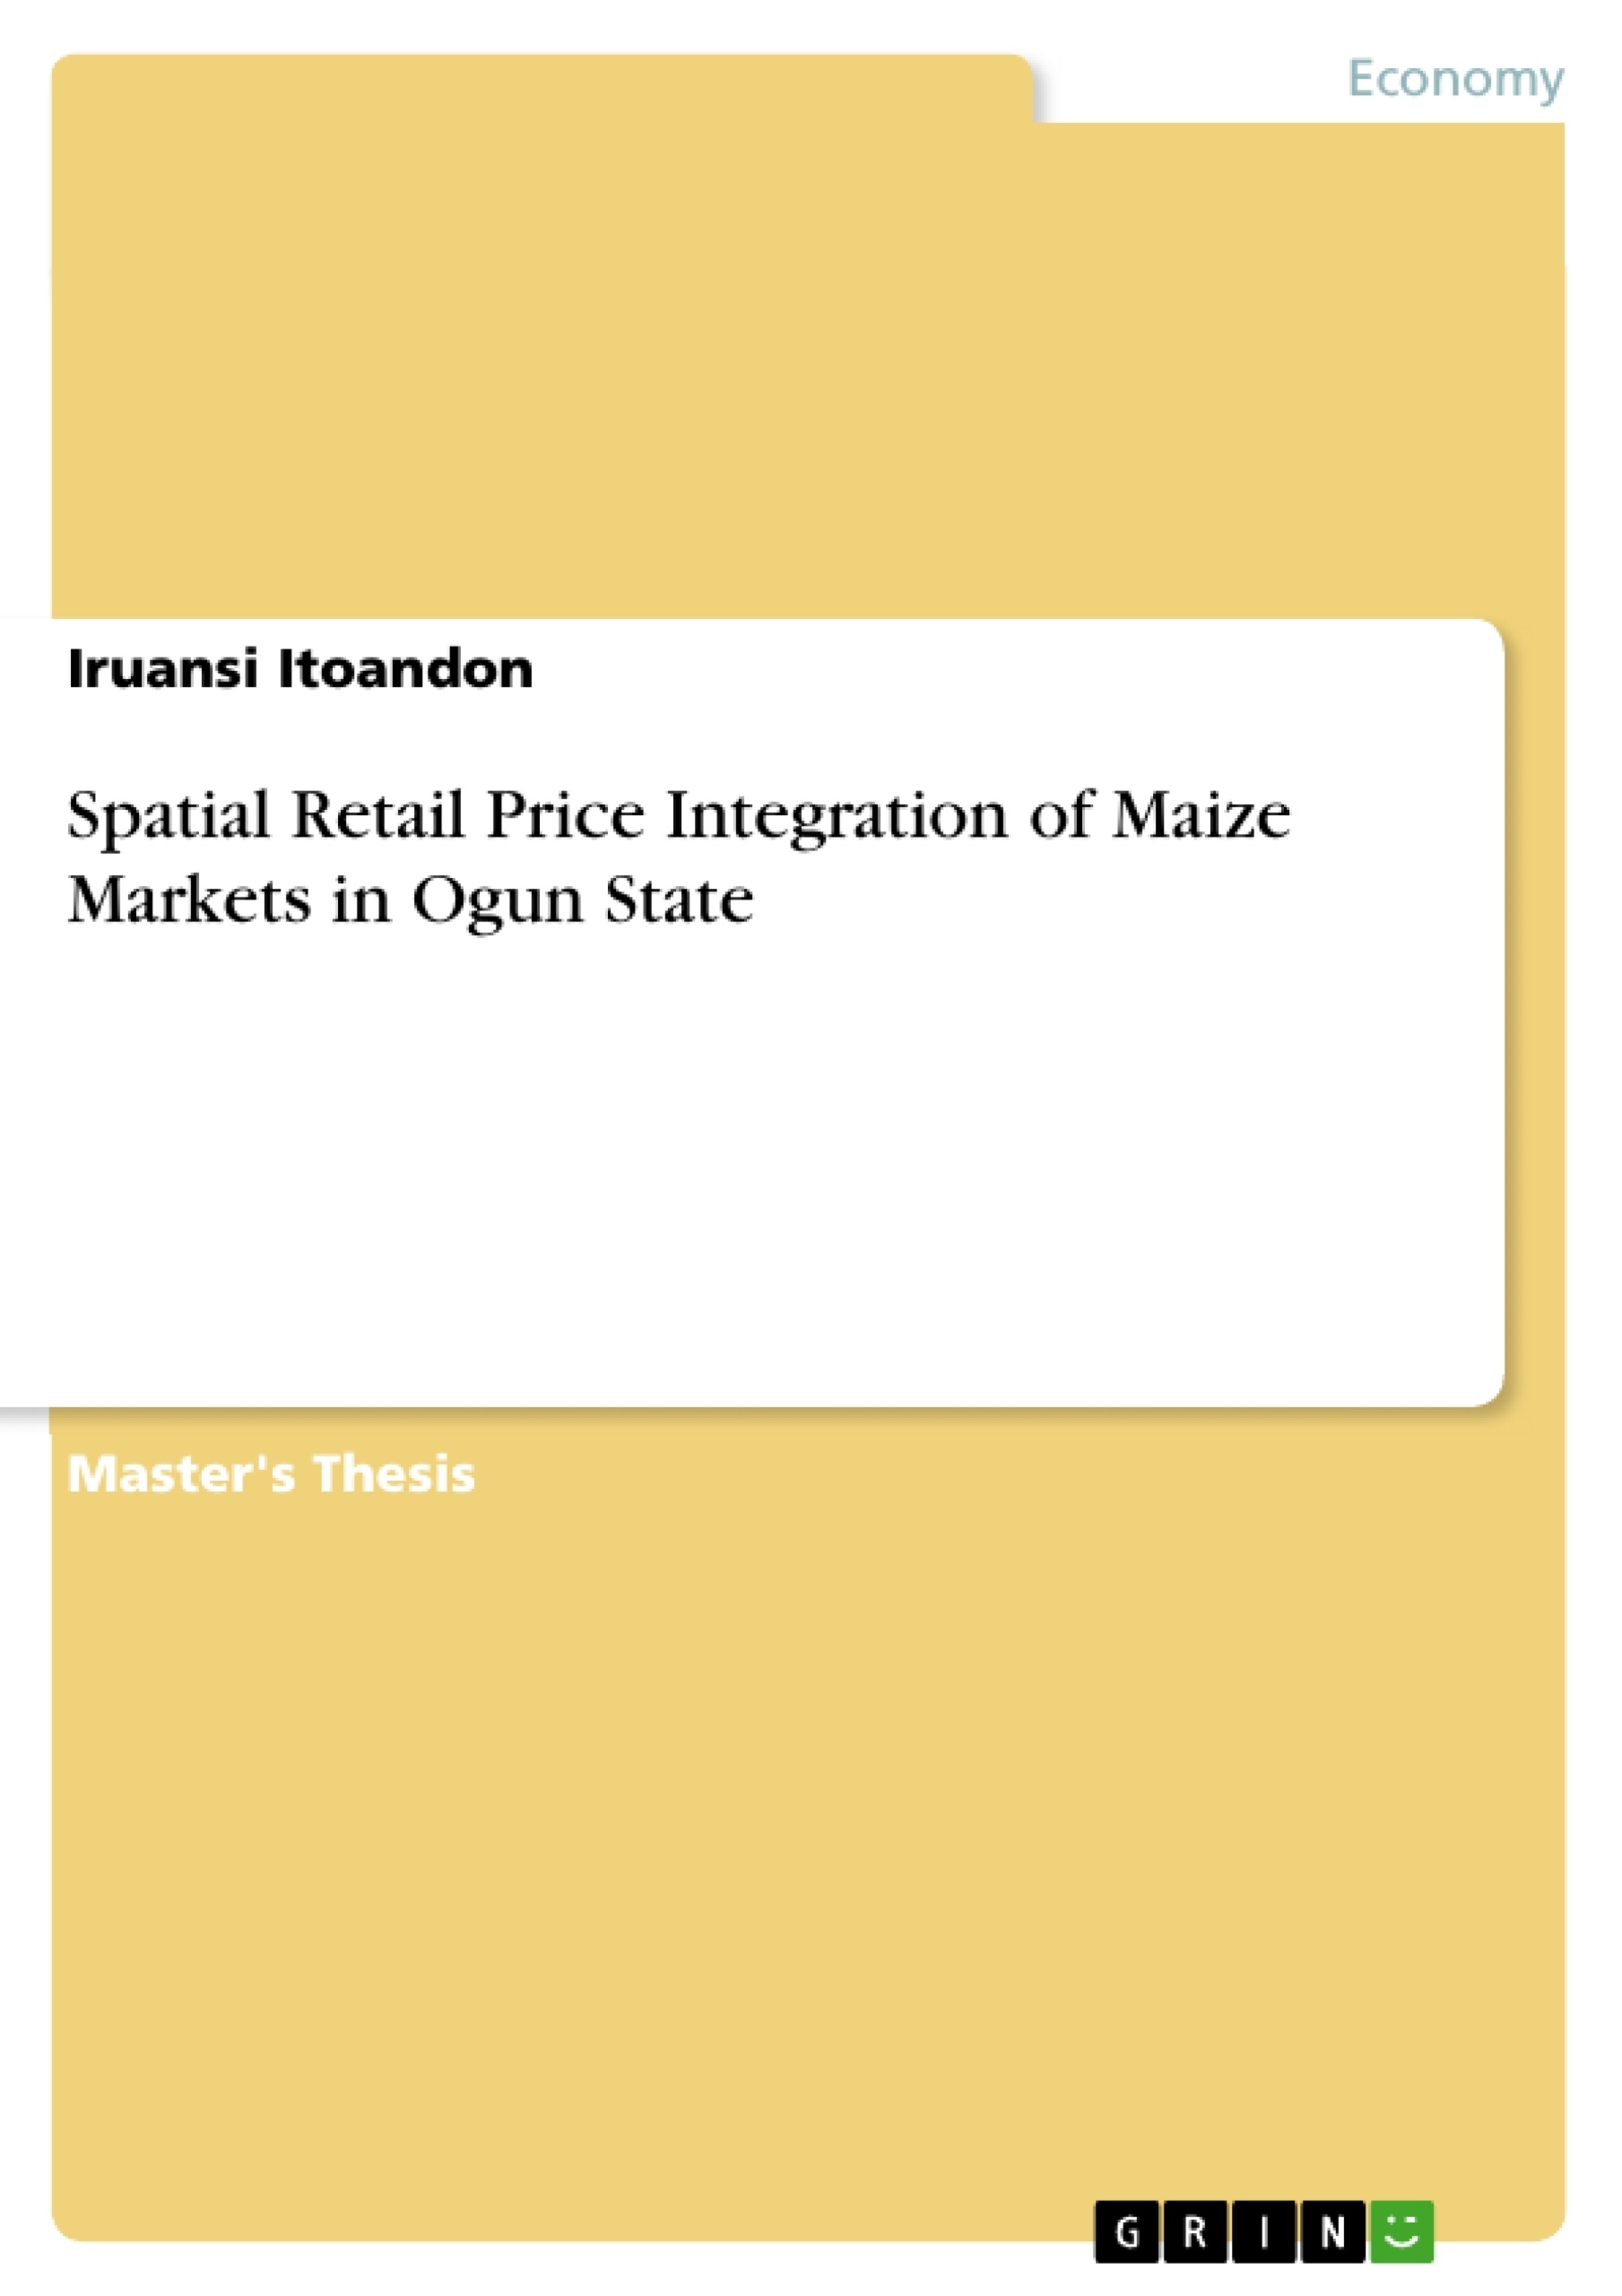 Título: Spatial Retail Price Integration of Maize Markets in Ogun State